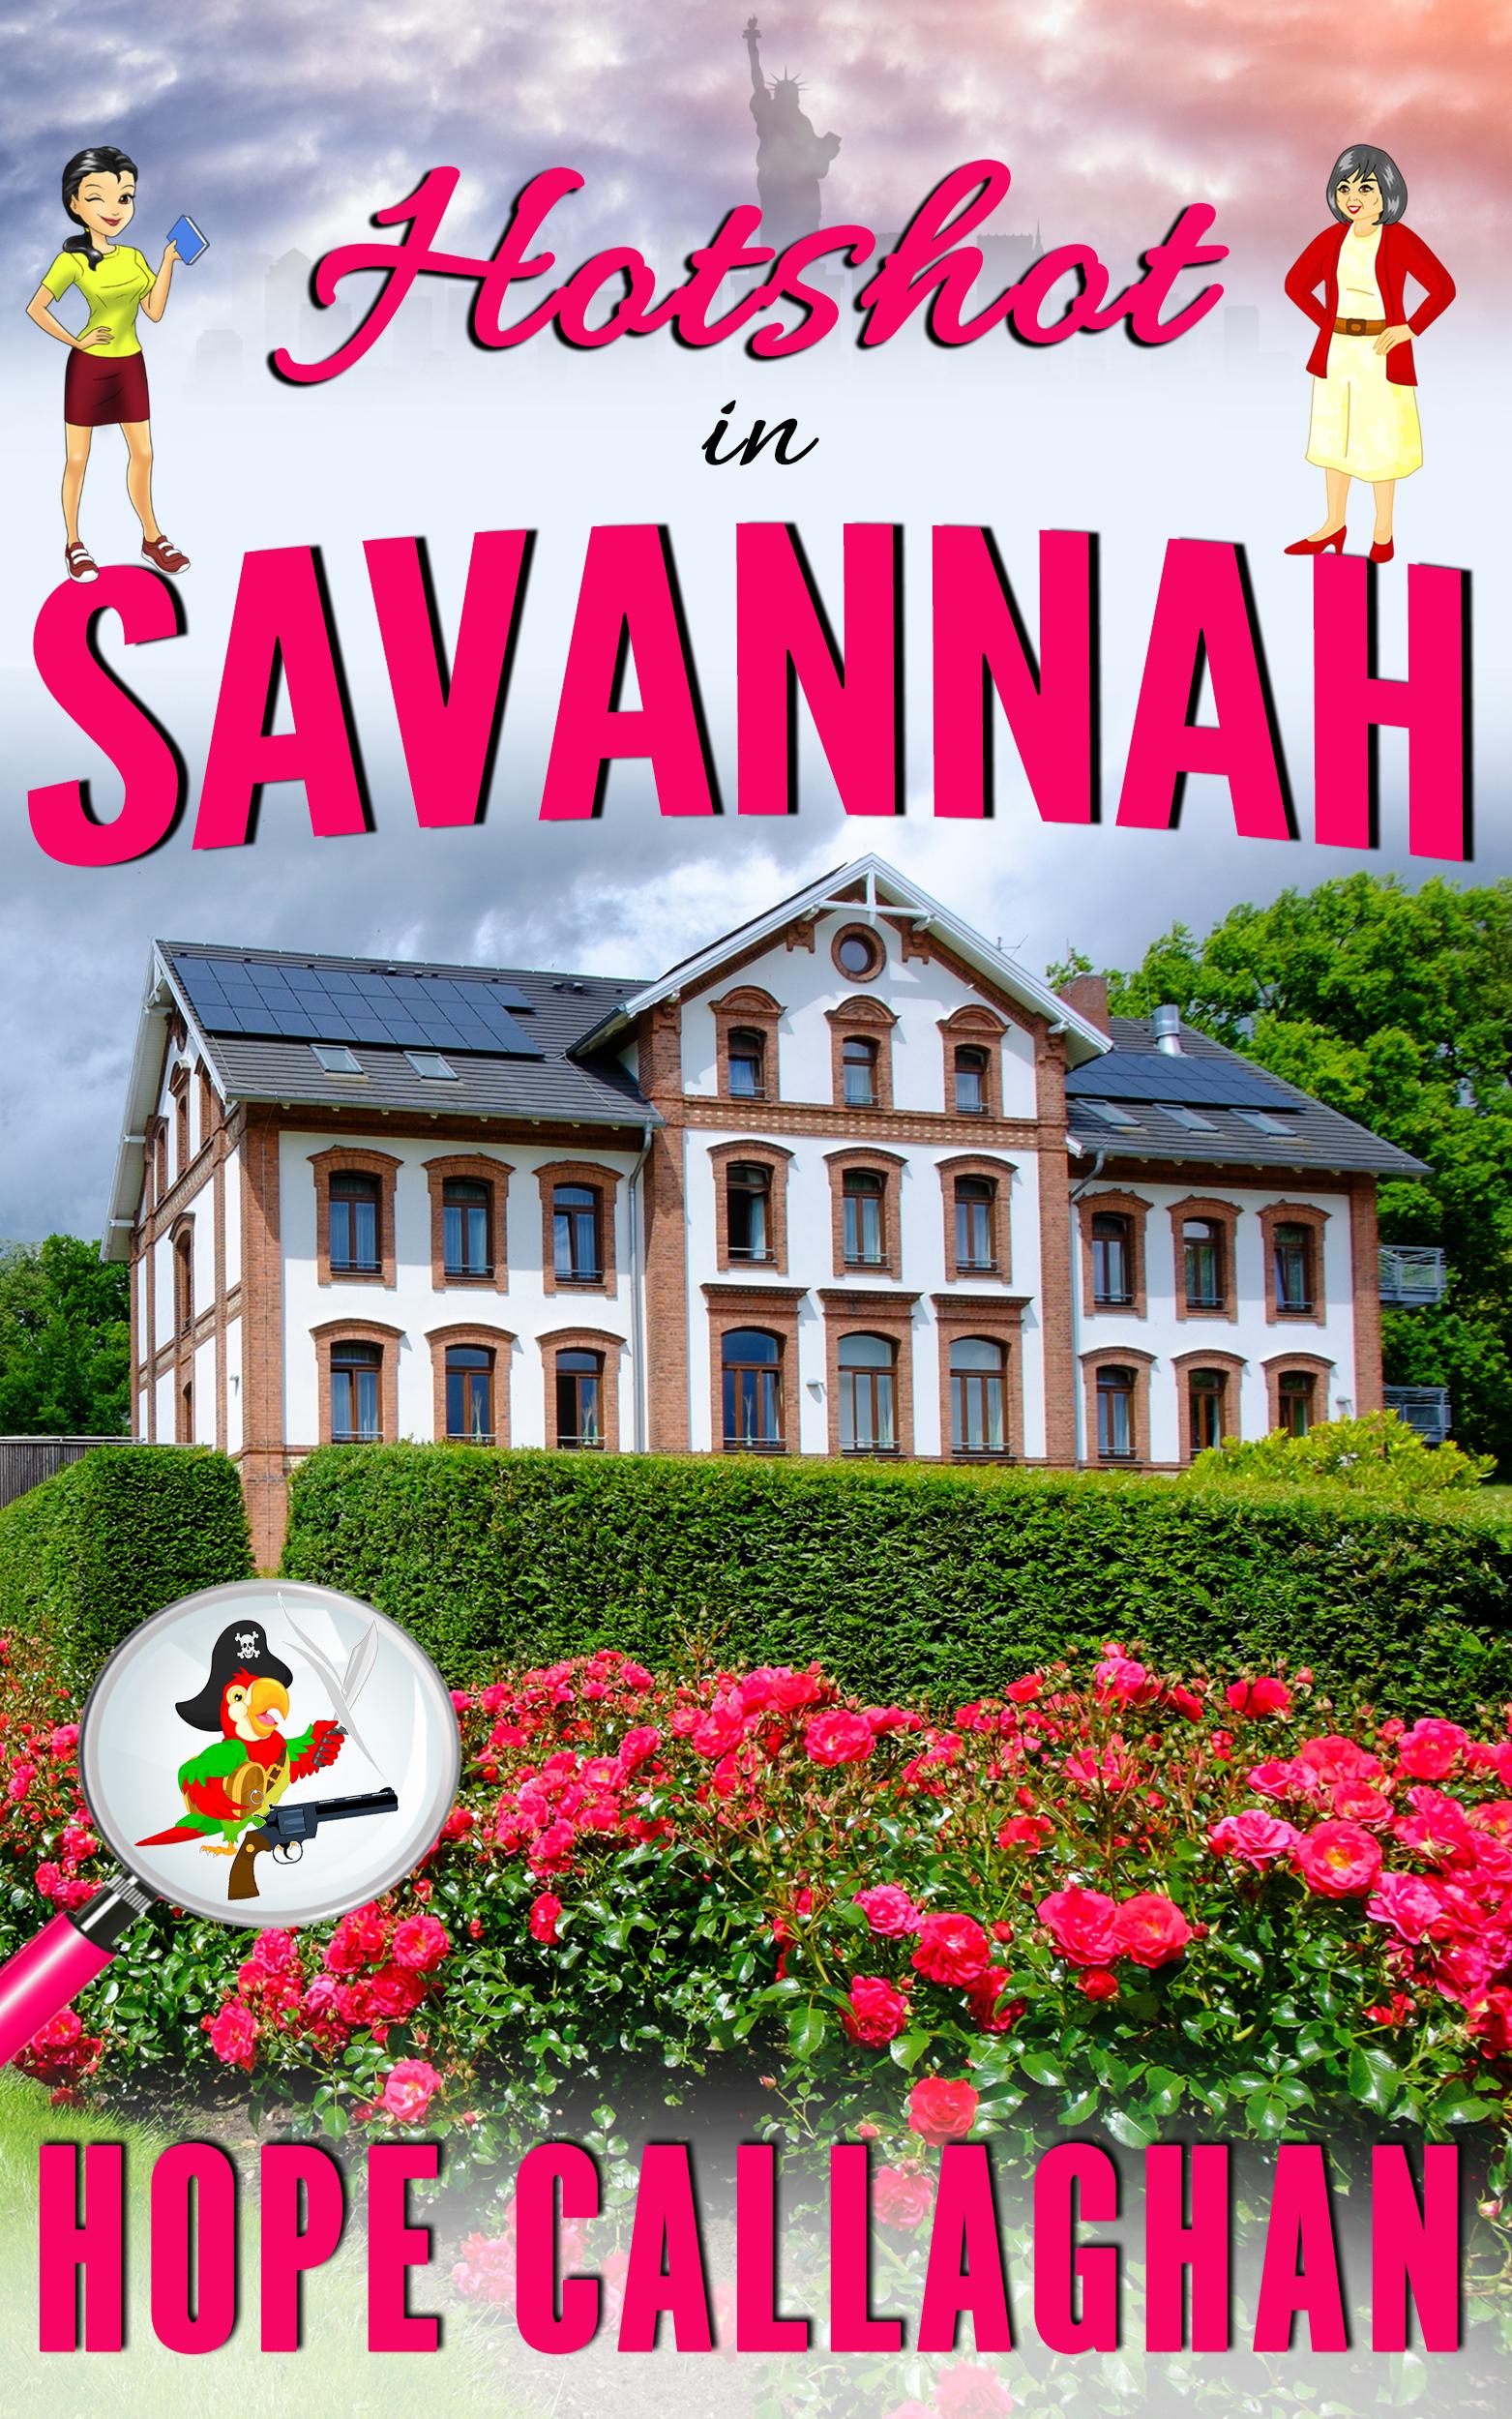 Get The Brand Made in Savannah Mystery Book While It's On Sale